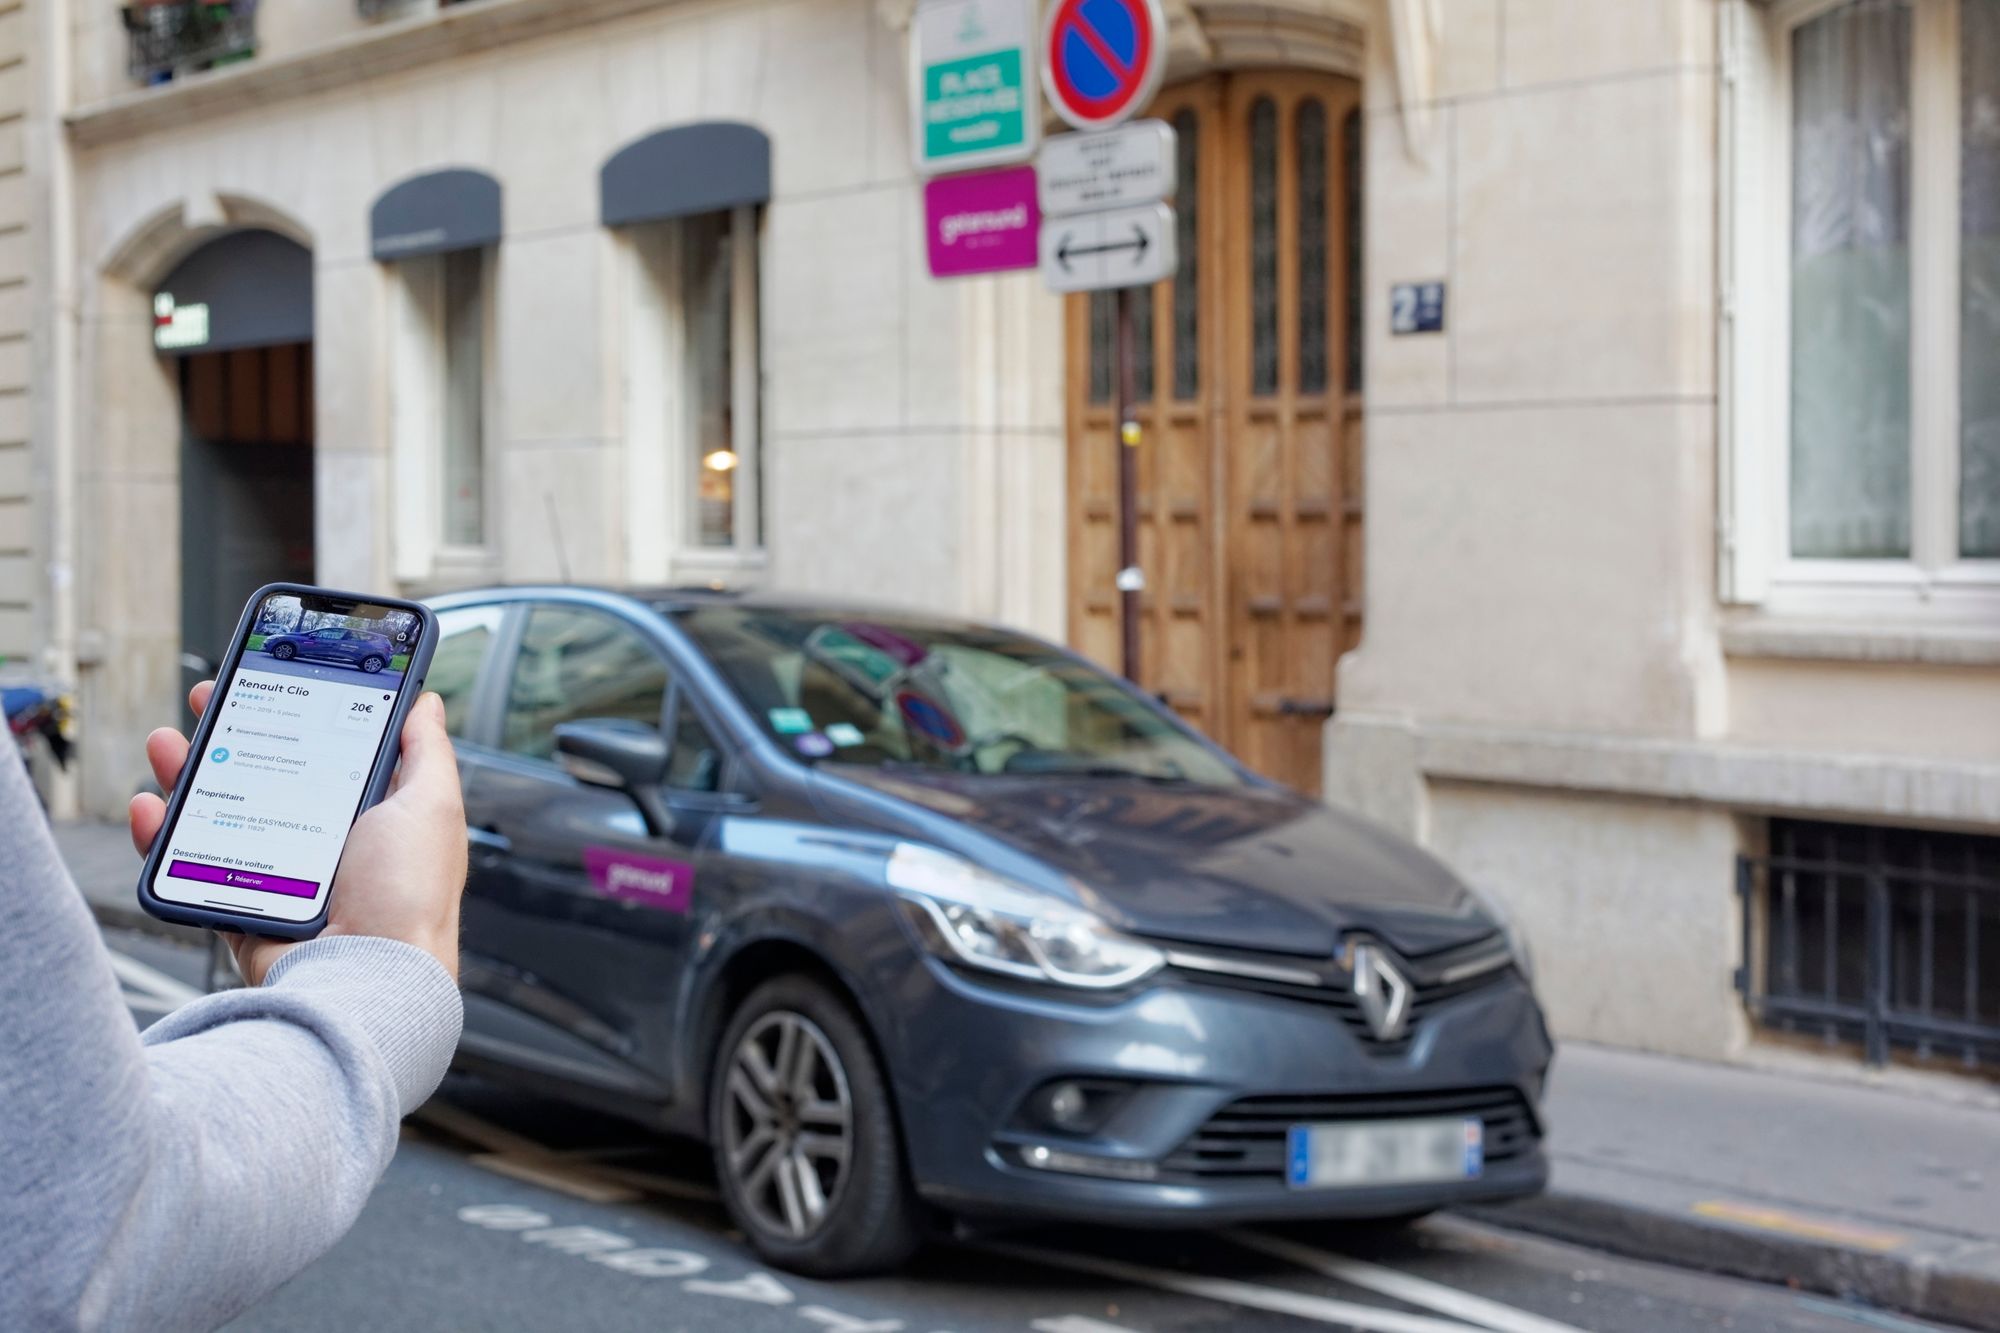 Getaround Reaches One Million Connected Trips in Europe